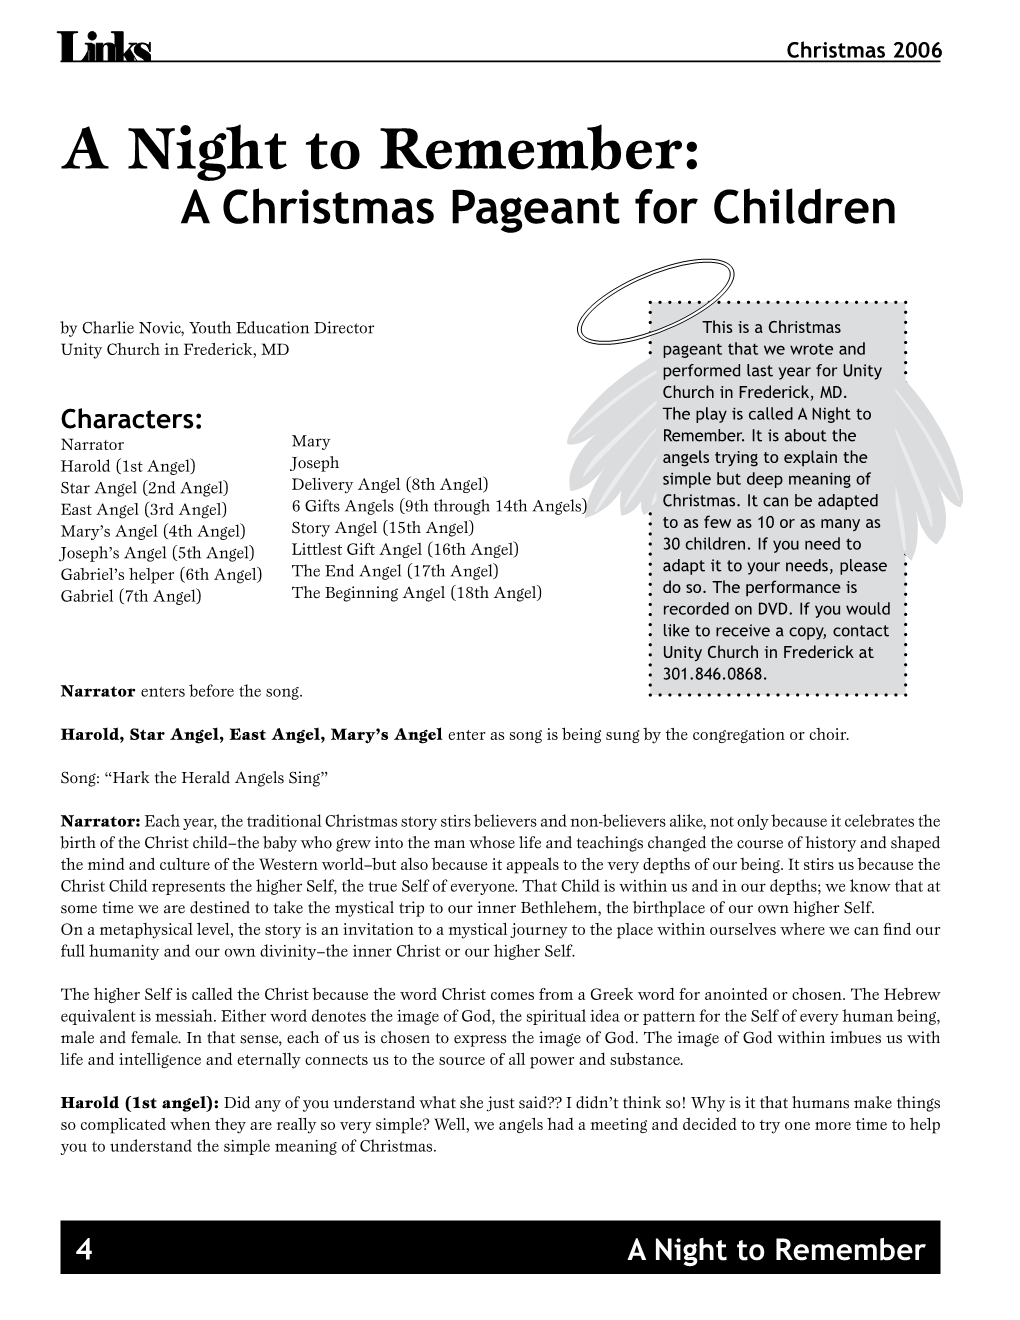 A Night to Remember: a Christmas Pageant for Children